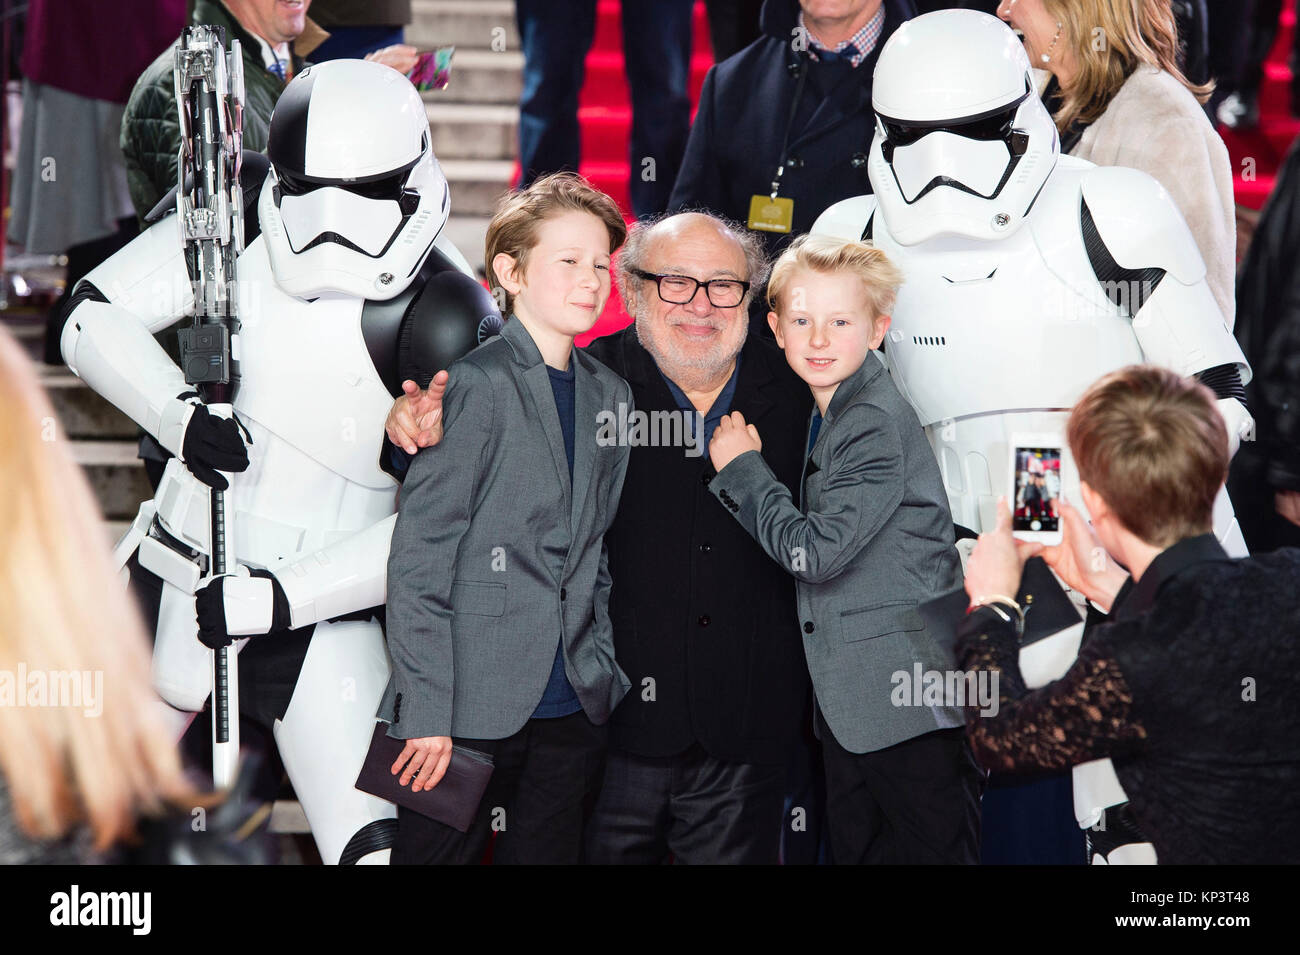 London, UK. 12th Dec, 2017. Danny DeVito attends the 'Star Wars: The Last Jedi' European premiere at Royal Albert Hall on December 12, 2017 in London, Great Britain. Credit: Geisler-Fotopress/Alamy Live News Stock Photo